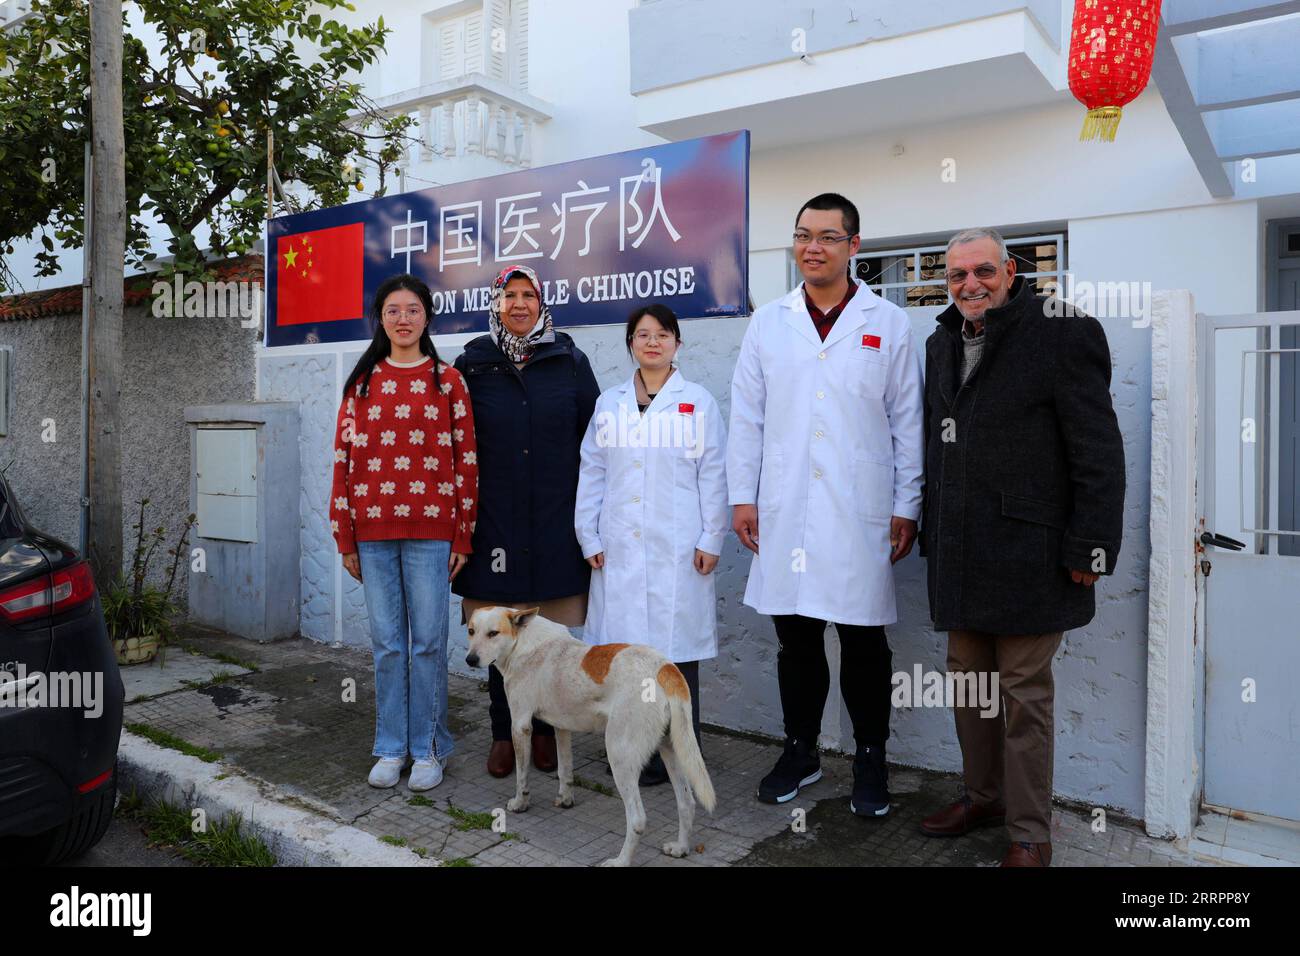 230405 -- MOHAMMEDIA MOROCCO, April 5, 2023 -- Members of a Chinese medical team in Mohammedia pose for a group photo with Arihe Maan 1st R who comes for acupuncture therapy in Mohammedia, Morocco, on Feb. 27, 2023. For nearly half a century, Chinese doctors, mainly obstetrician-gynecologists, have earned a sterling reputation for their professionalism and dedication in some remote areas of Morocco. Many pregnant women from across the country come to seek medical advice and childbirth care from them.  TO GO WITH Feature: Chinese doctors win hearts, applause with professionalism, dedication in Stock Photo